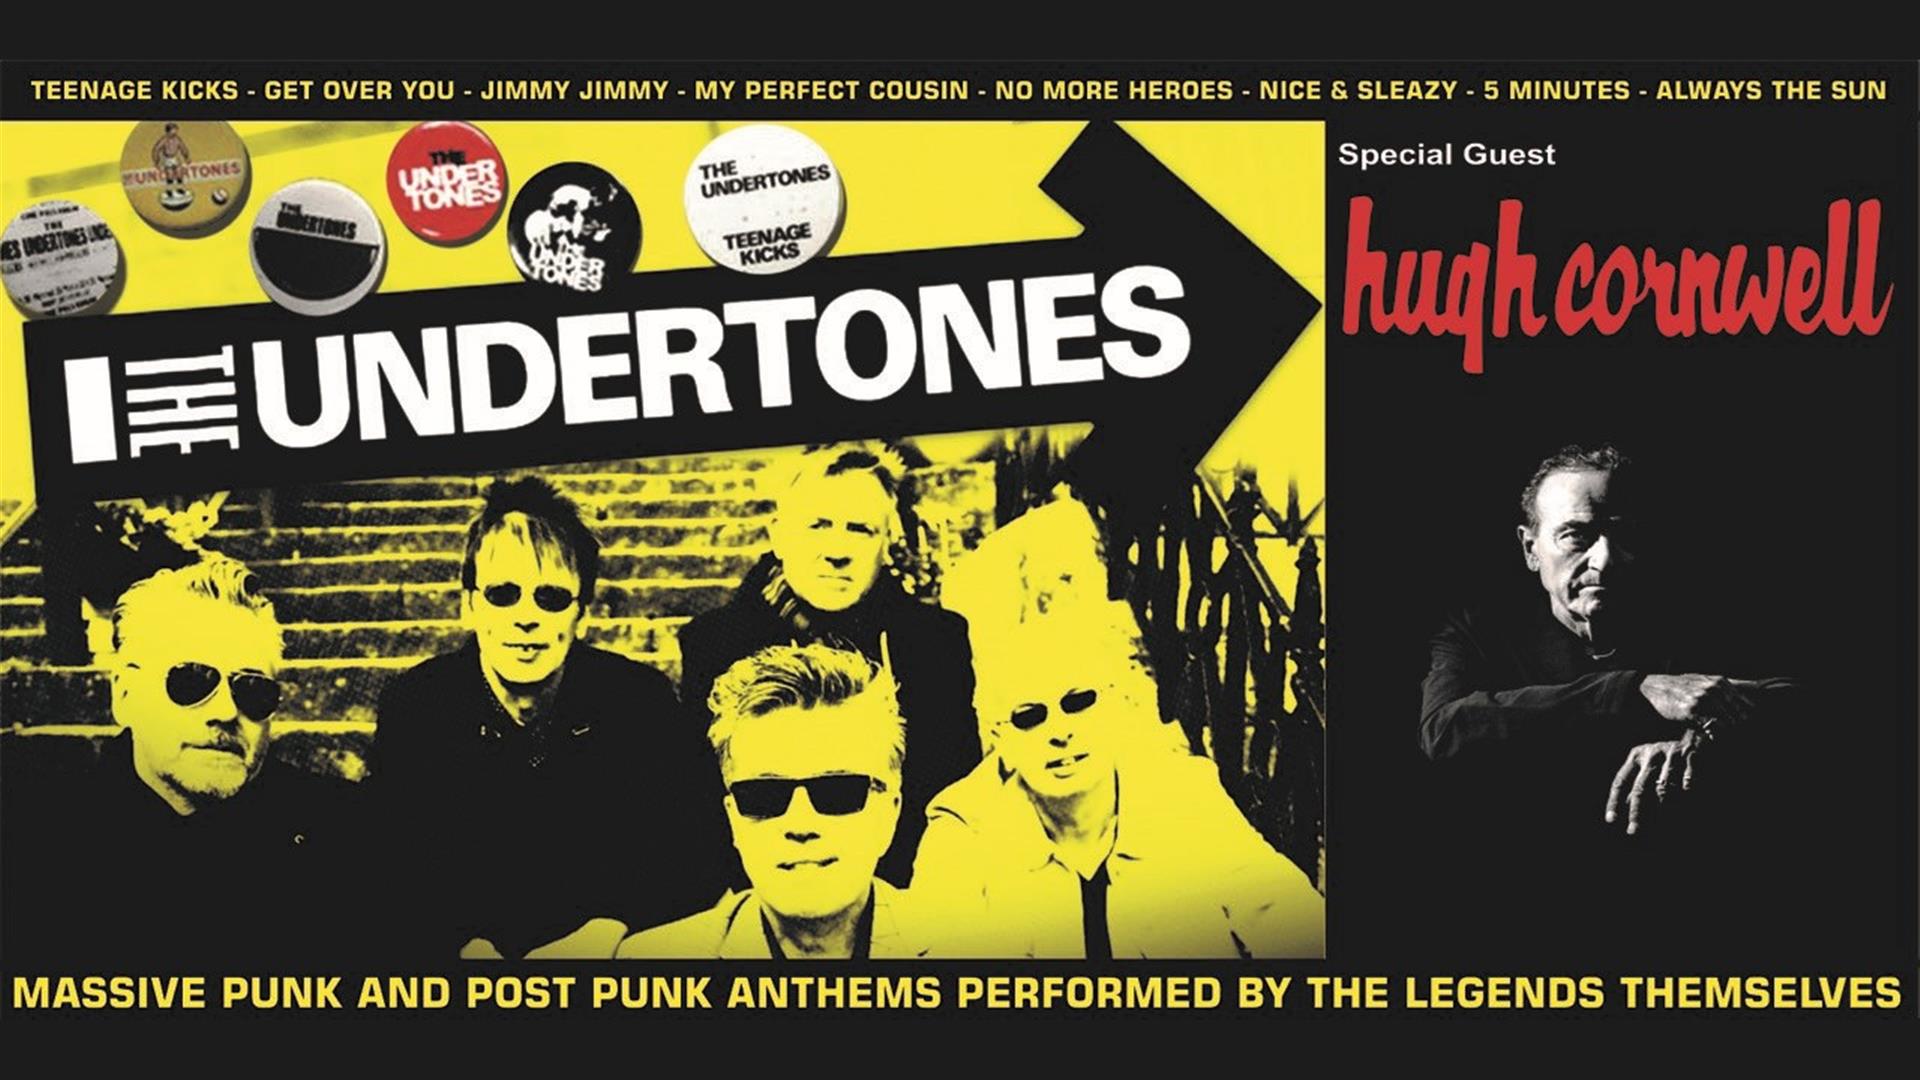 The Undertones plus special guest Hugh Cornwell - Lowther Pavilion